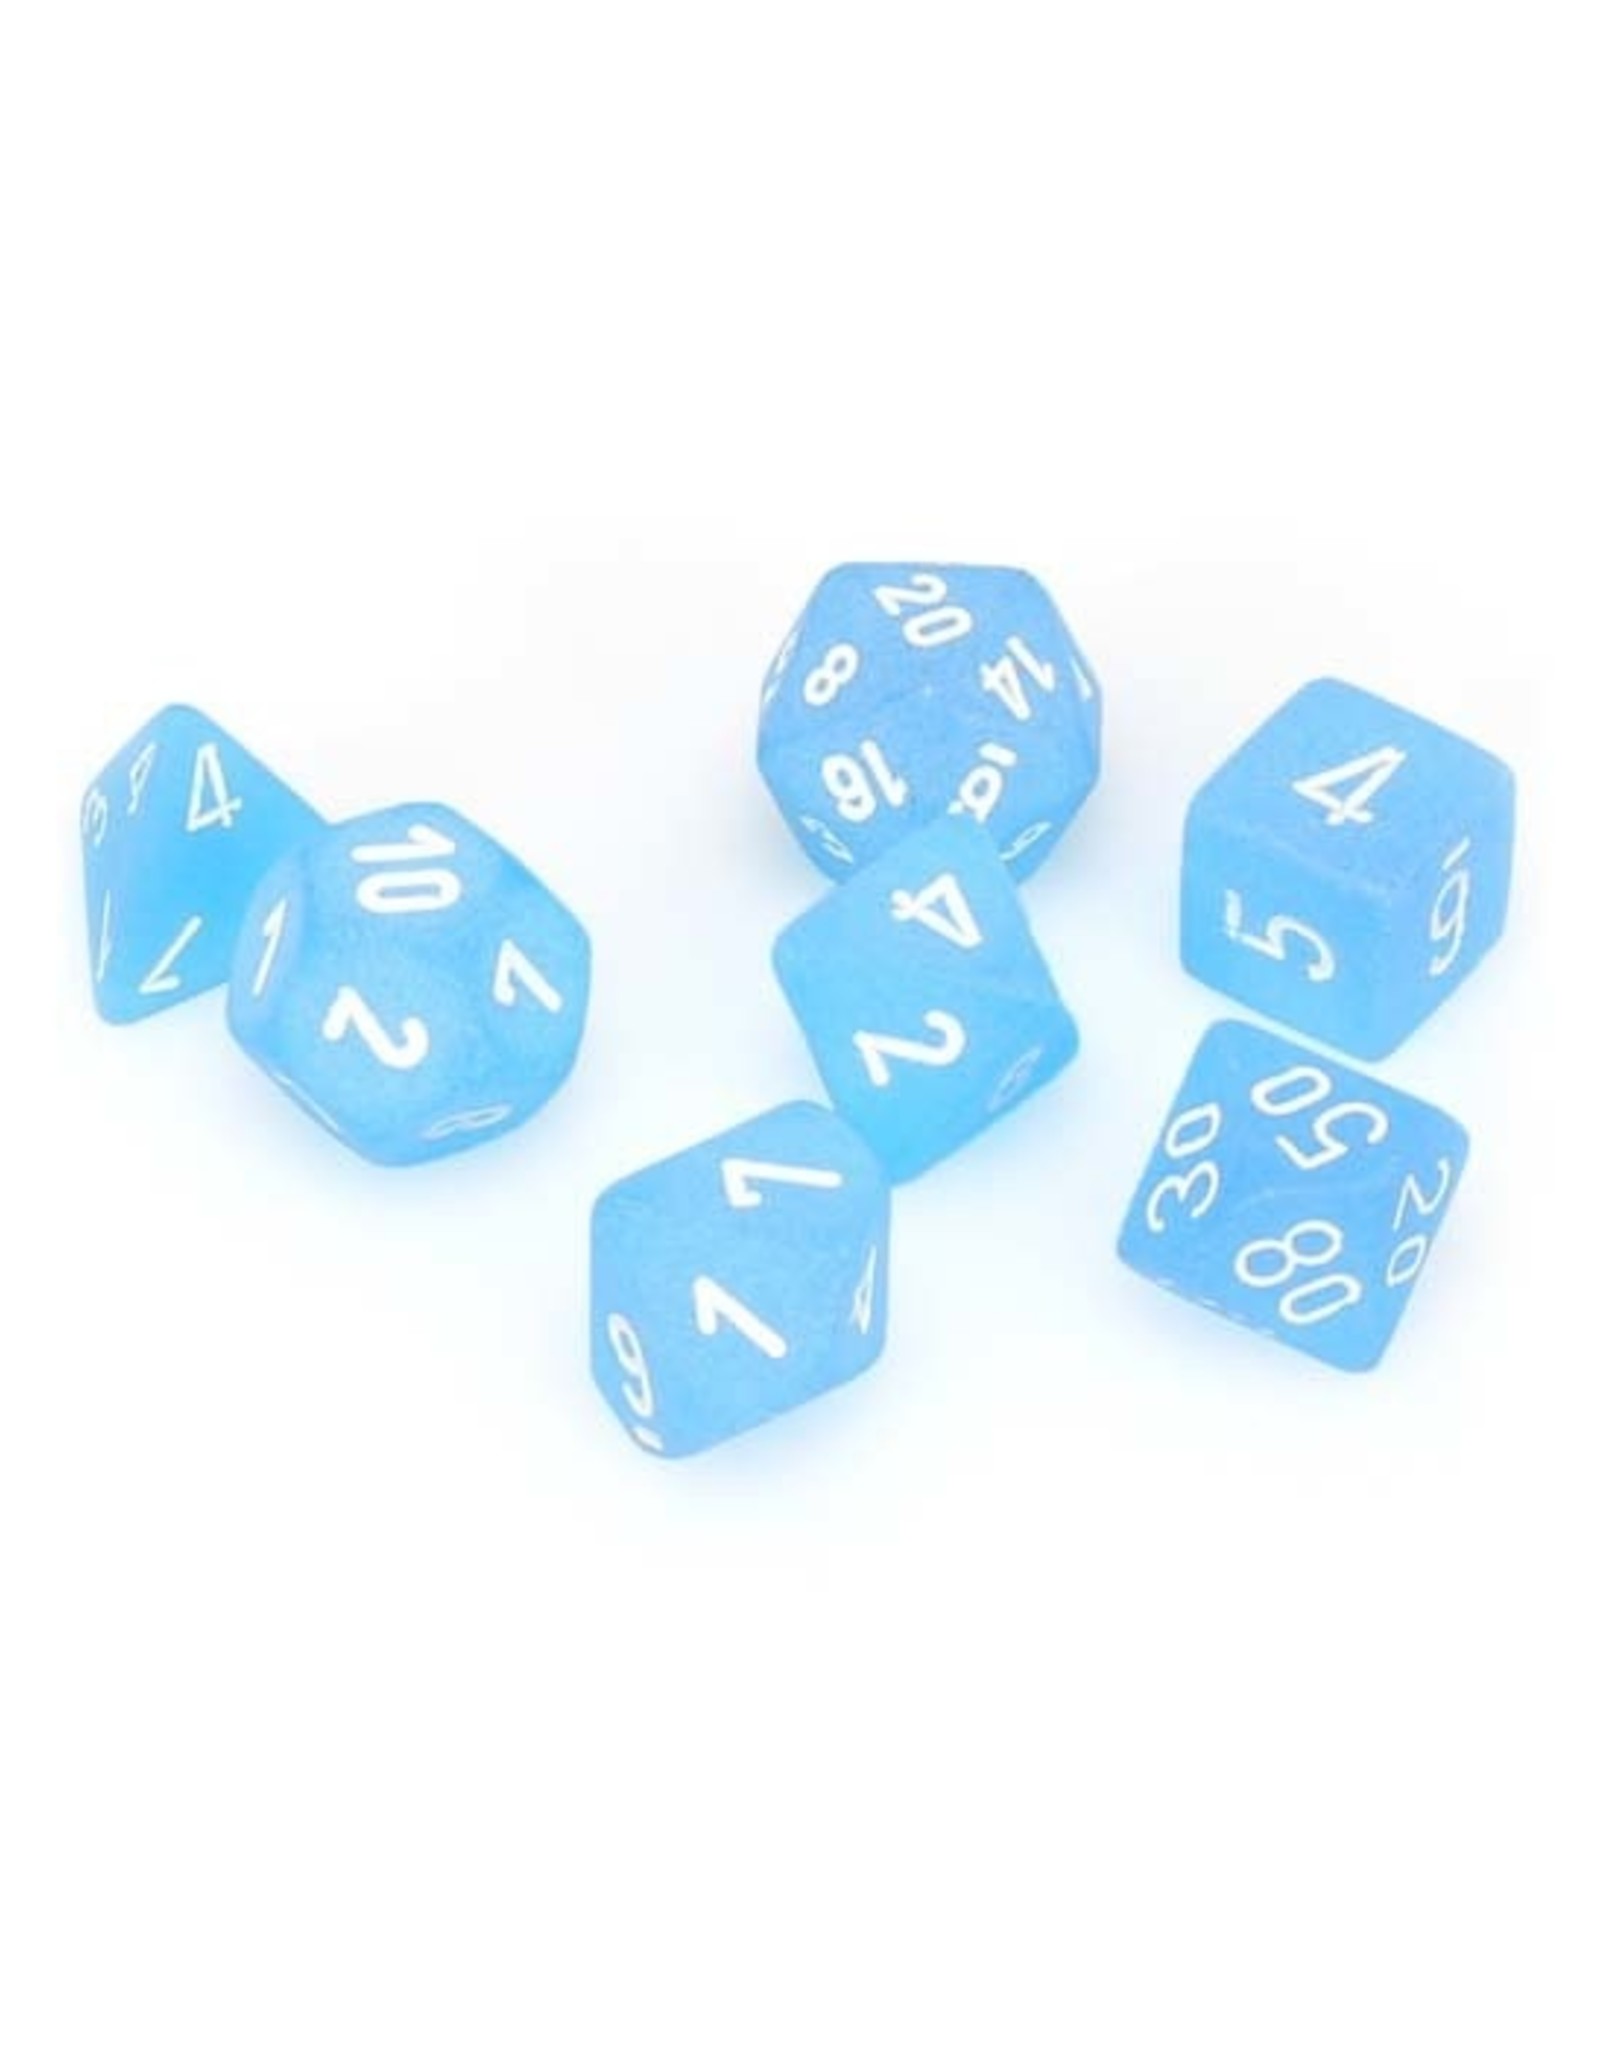 Chessex Chessex: Poly 7 Set - Frosted - Caribbean Blue w/ White